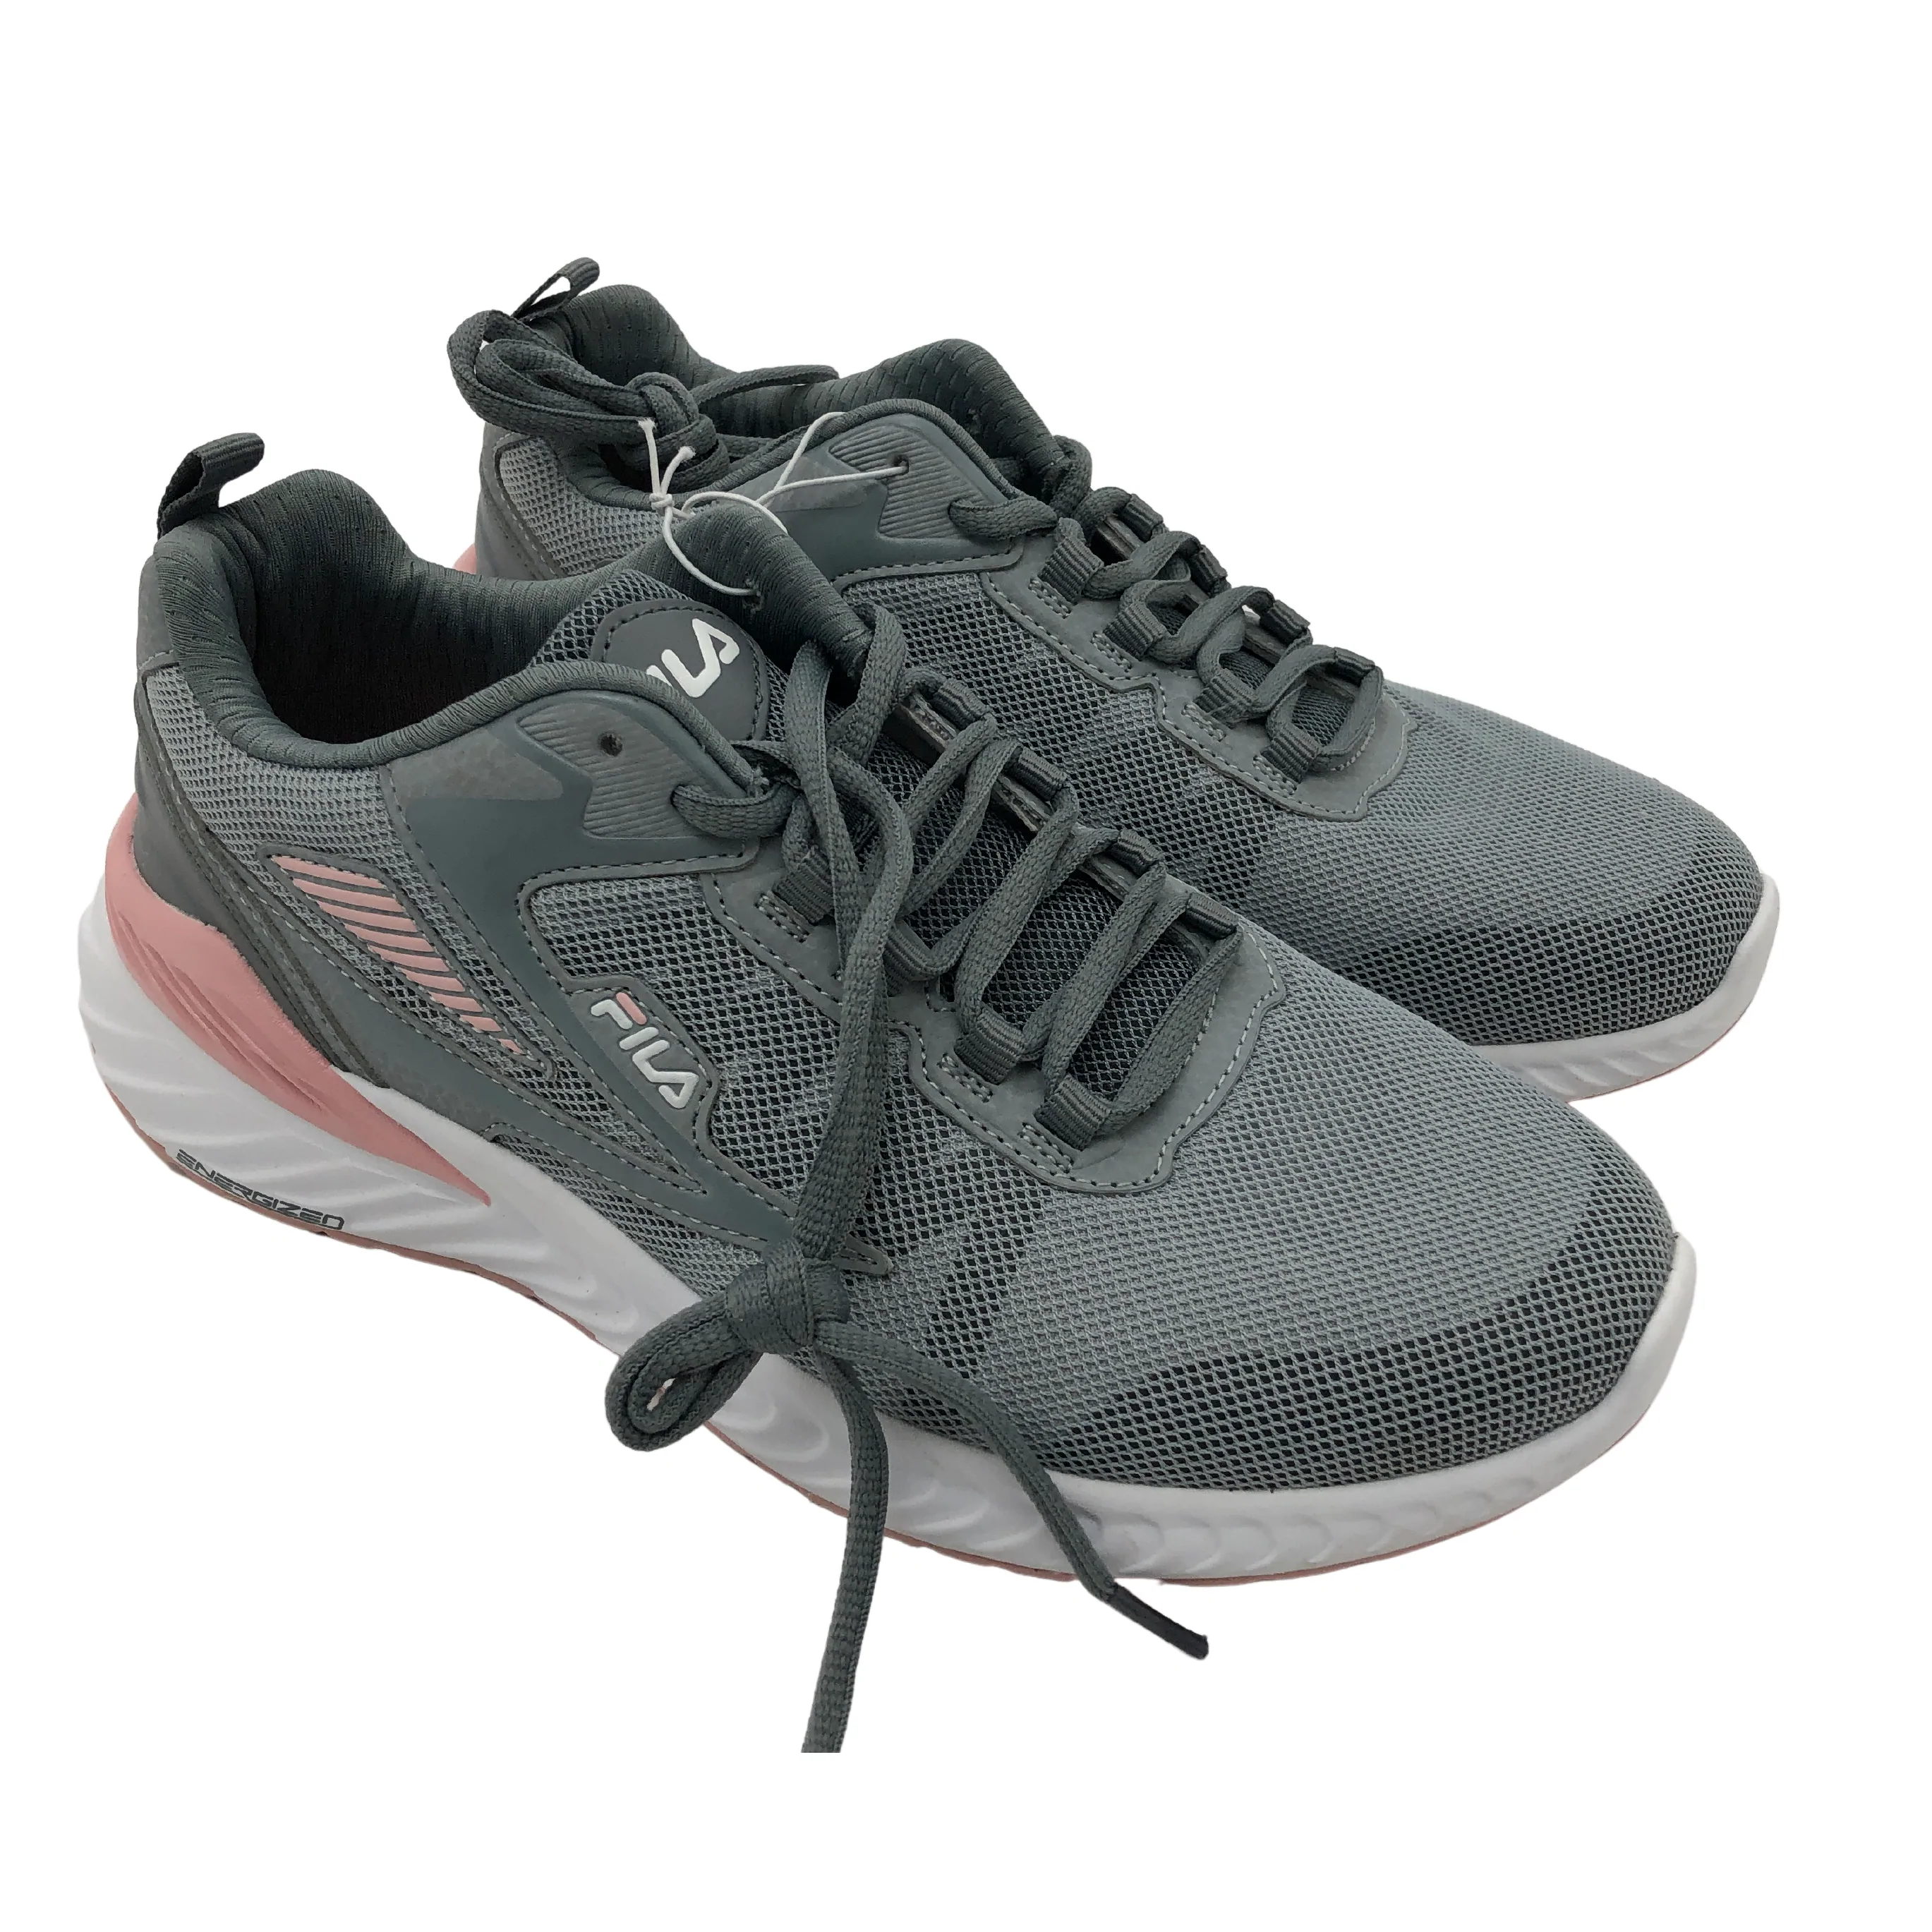 Fila Women's Running Shoes / Trazoros Energized 2 / Grey with Pink / Size 5